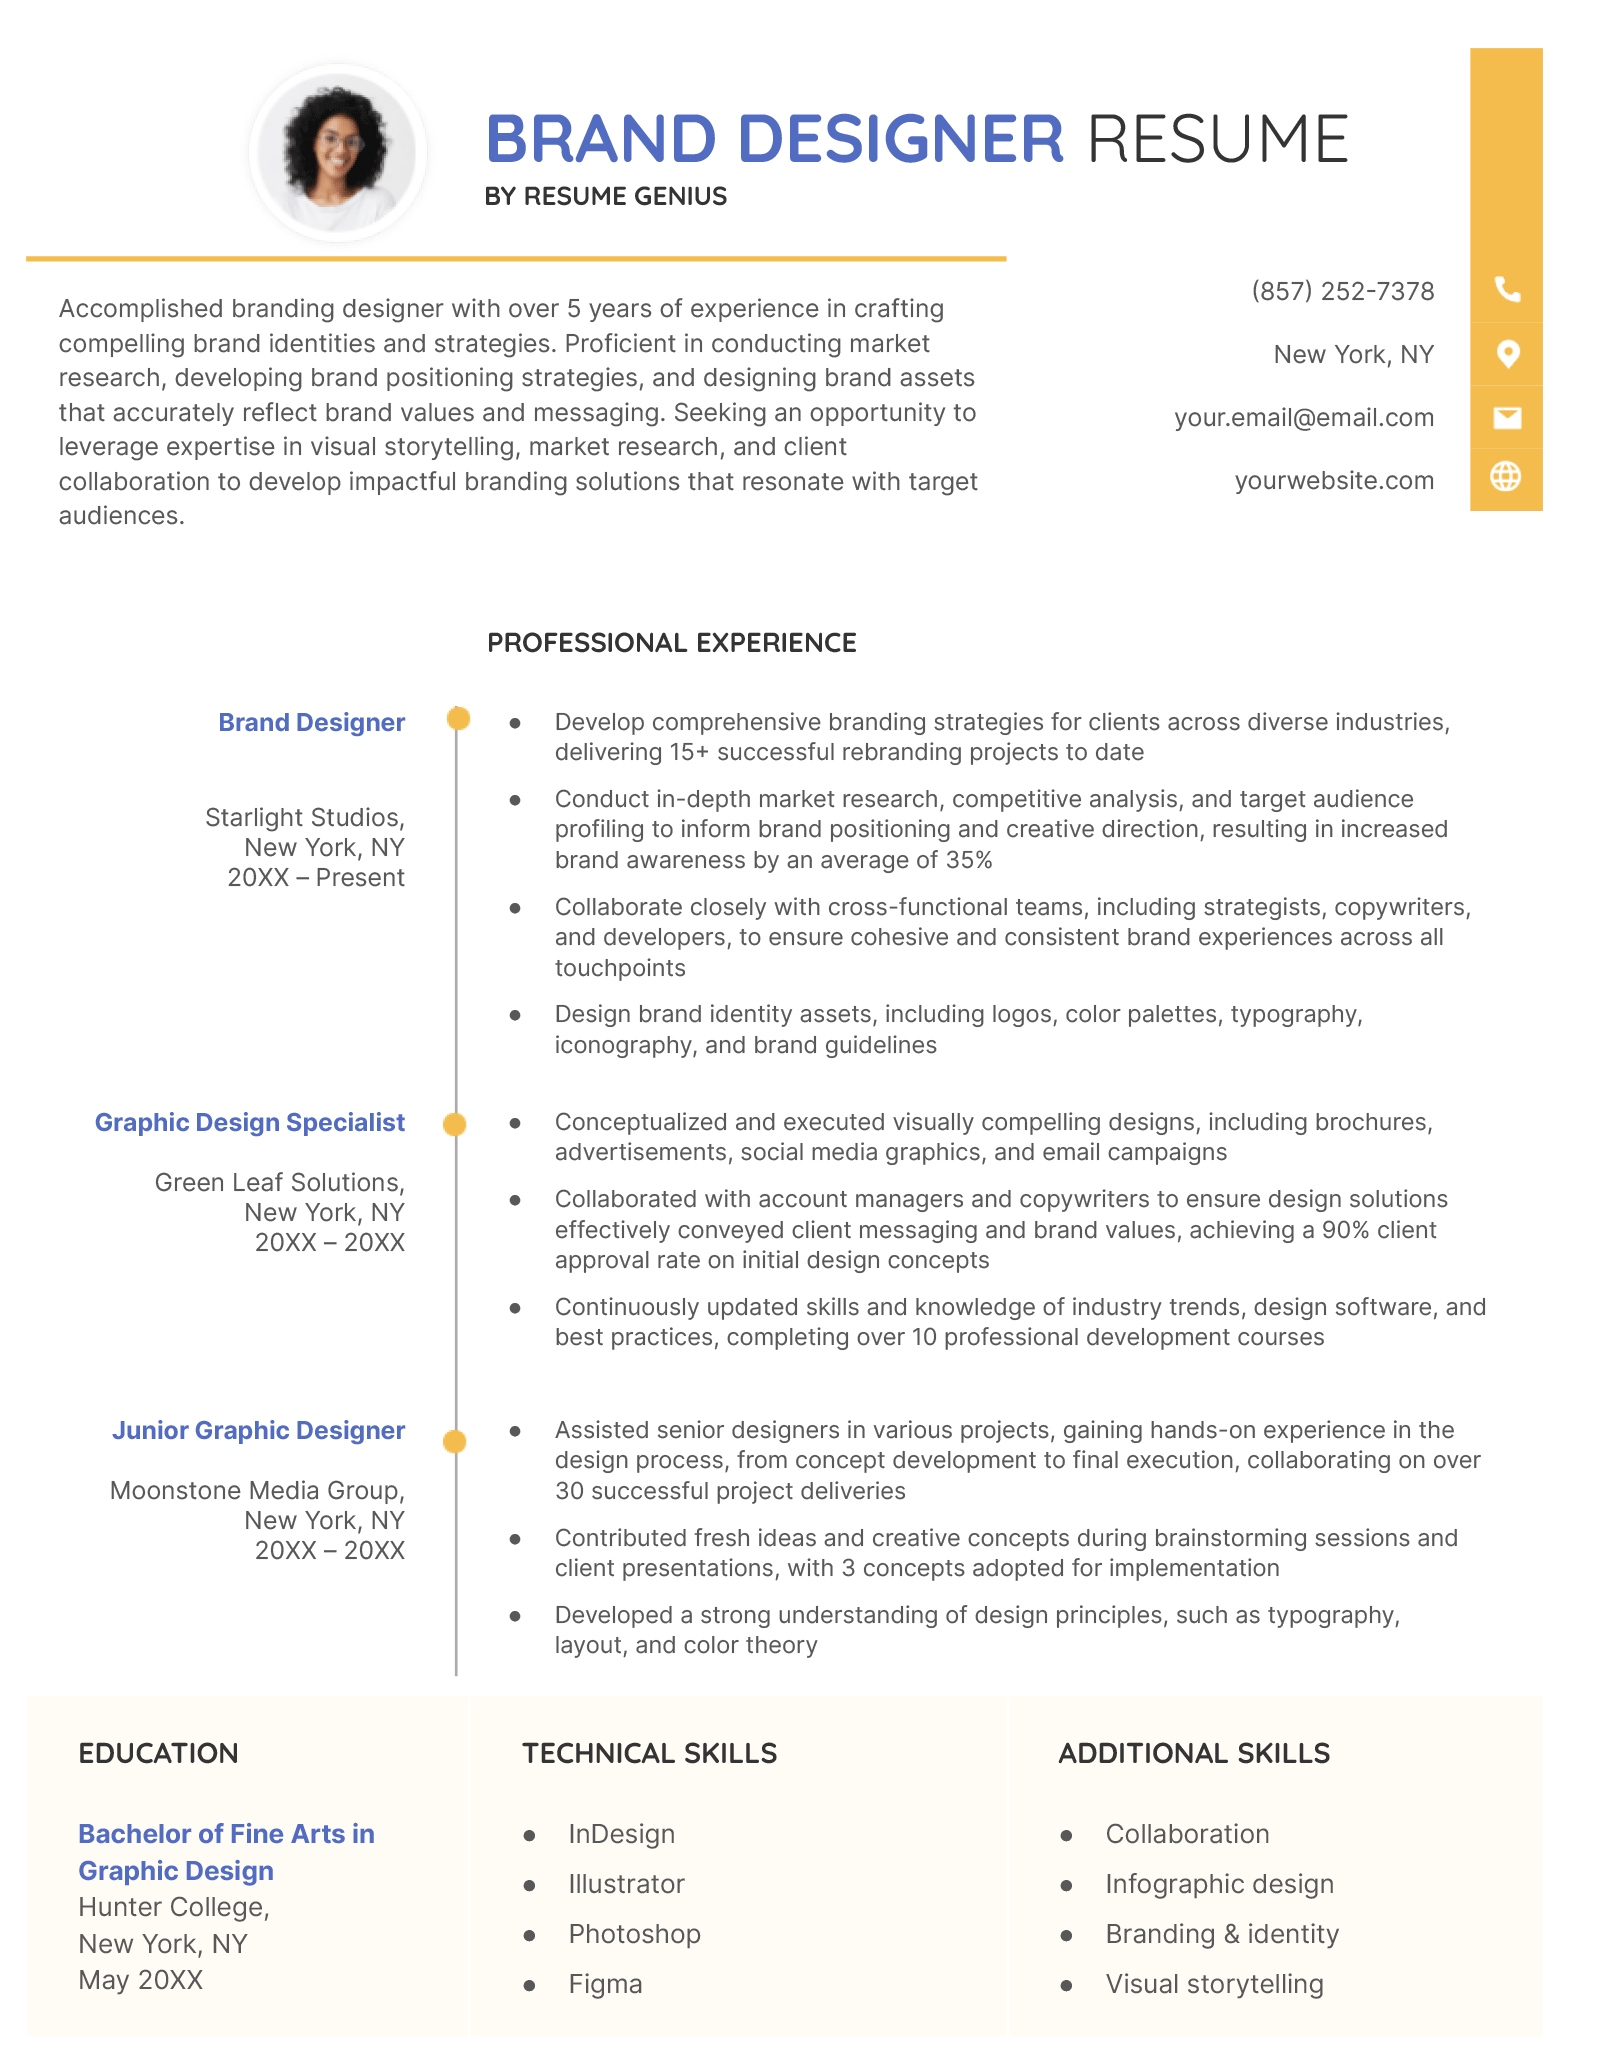 An example resume for a brand designer.